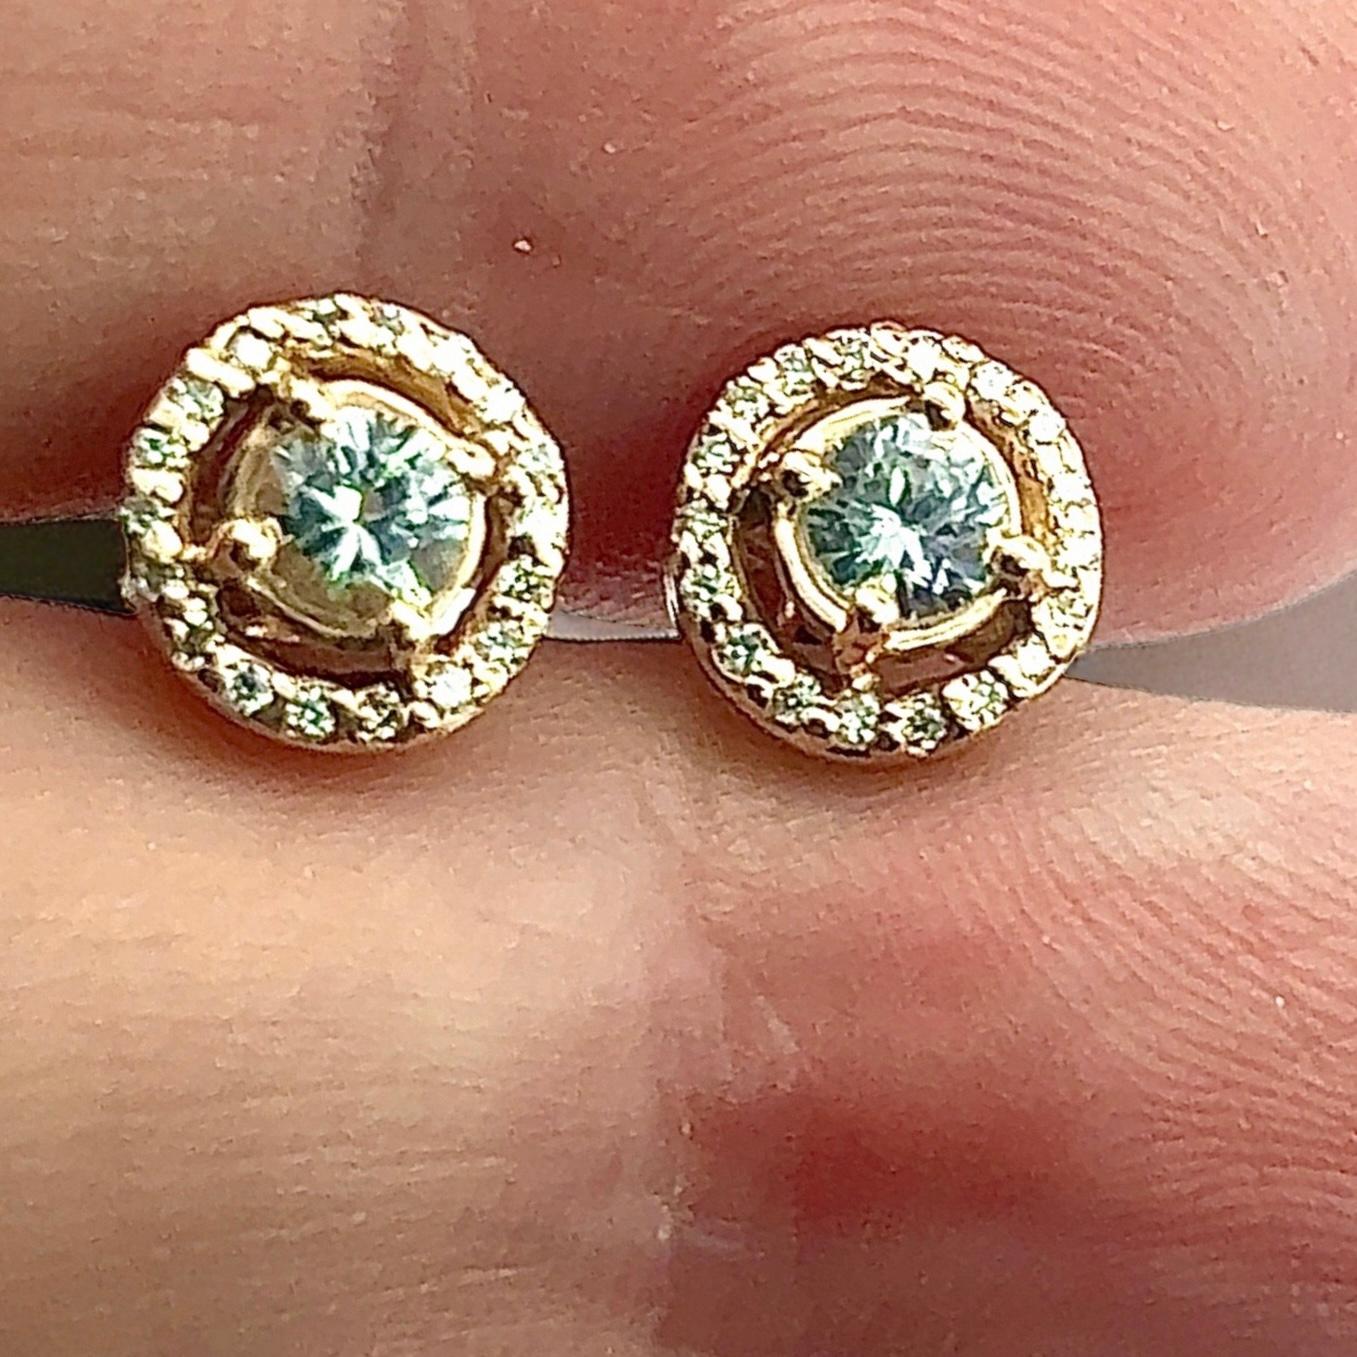 Natural White Sapphire Diamond Stud Earrings 14k Yellow Gold 0.97 TCW Certified In New Condition For Sale In Brooklyn, NY